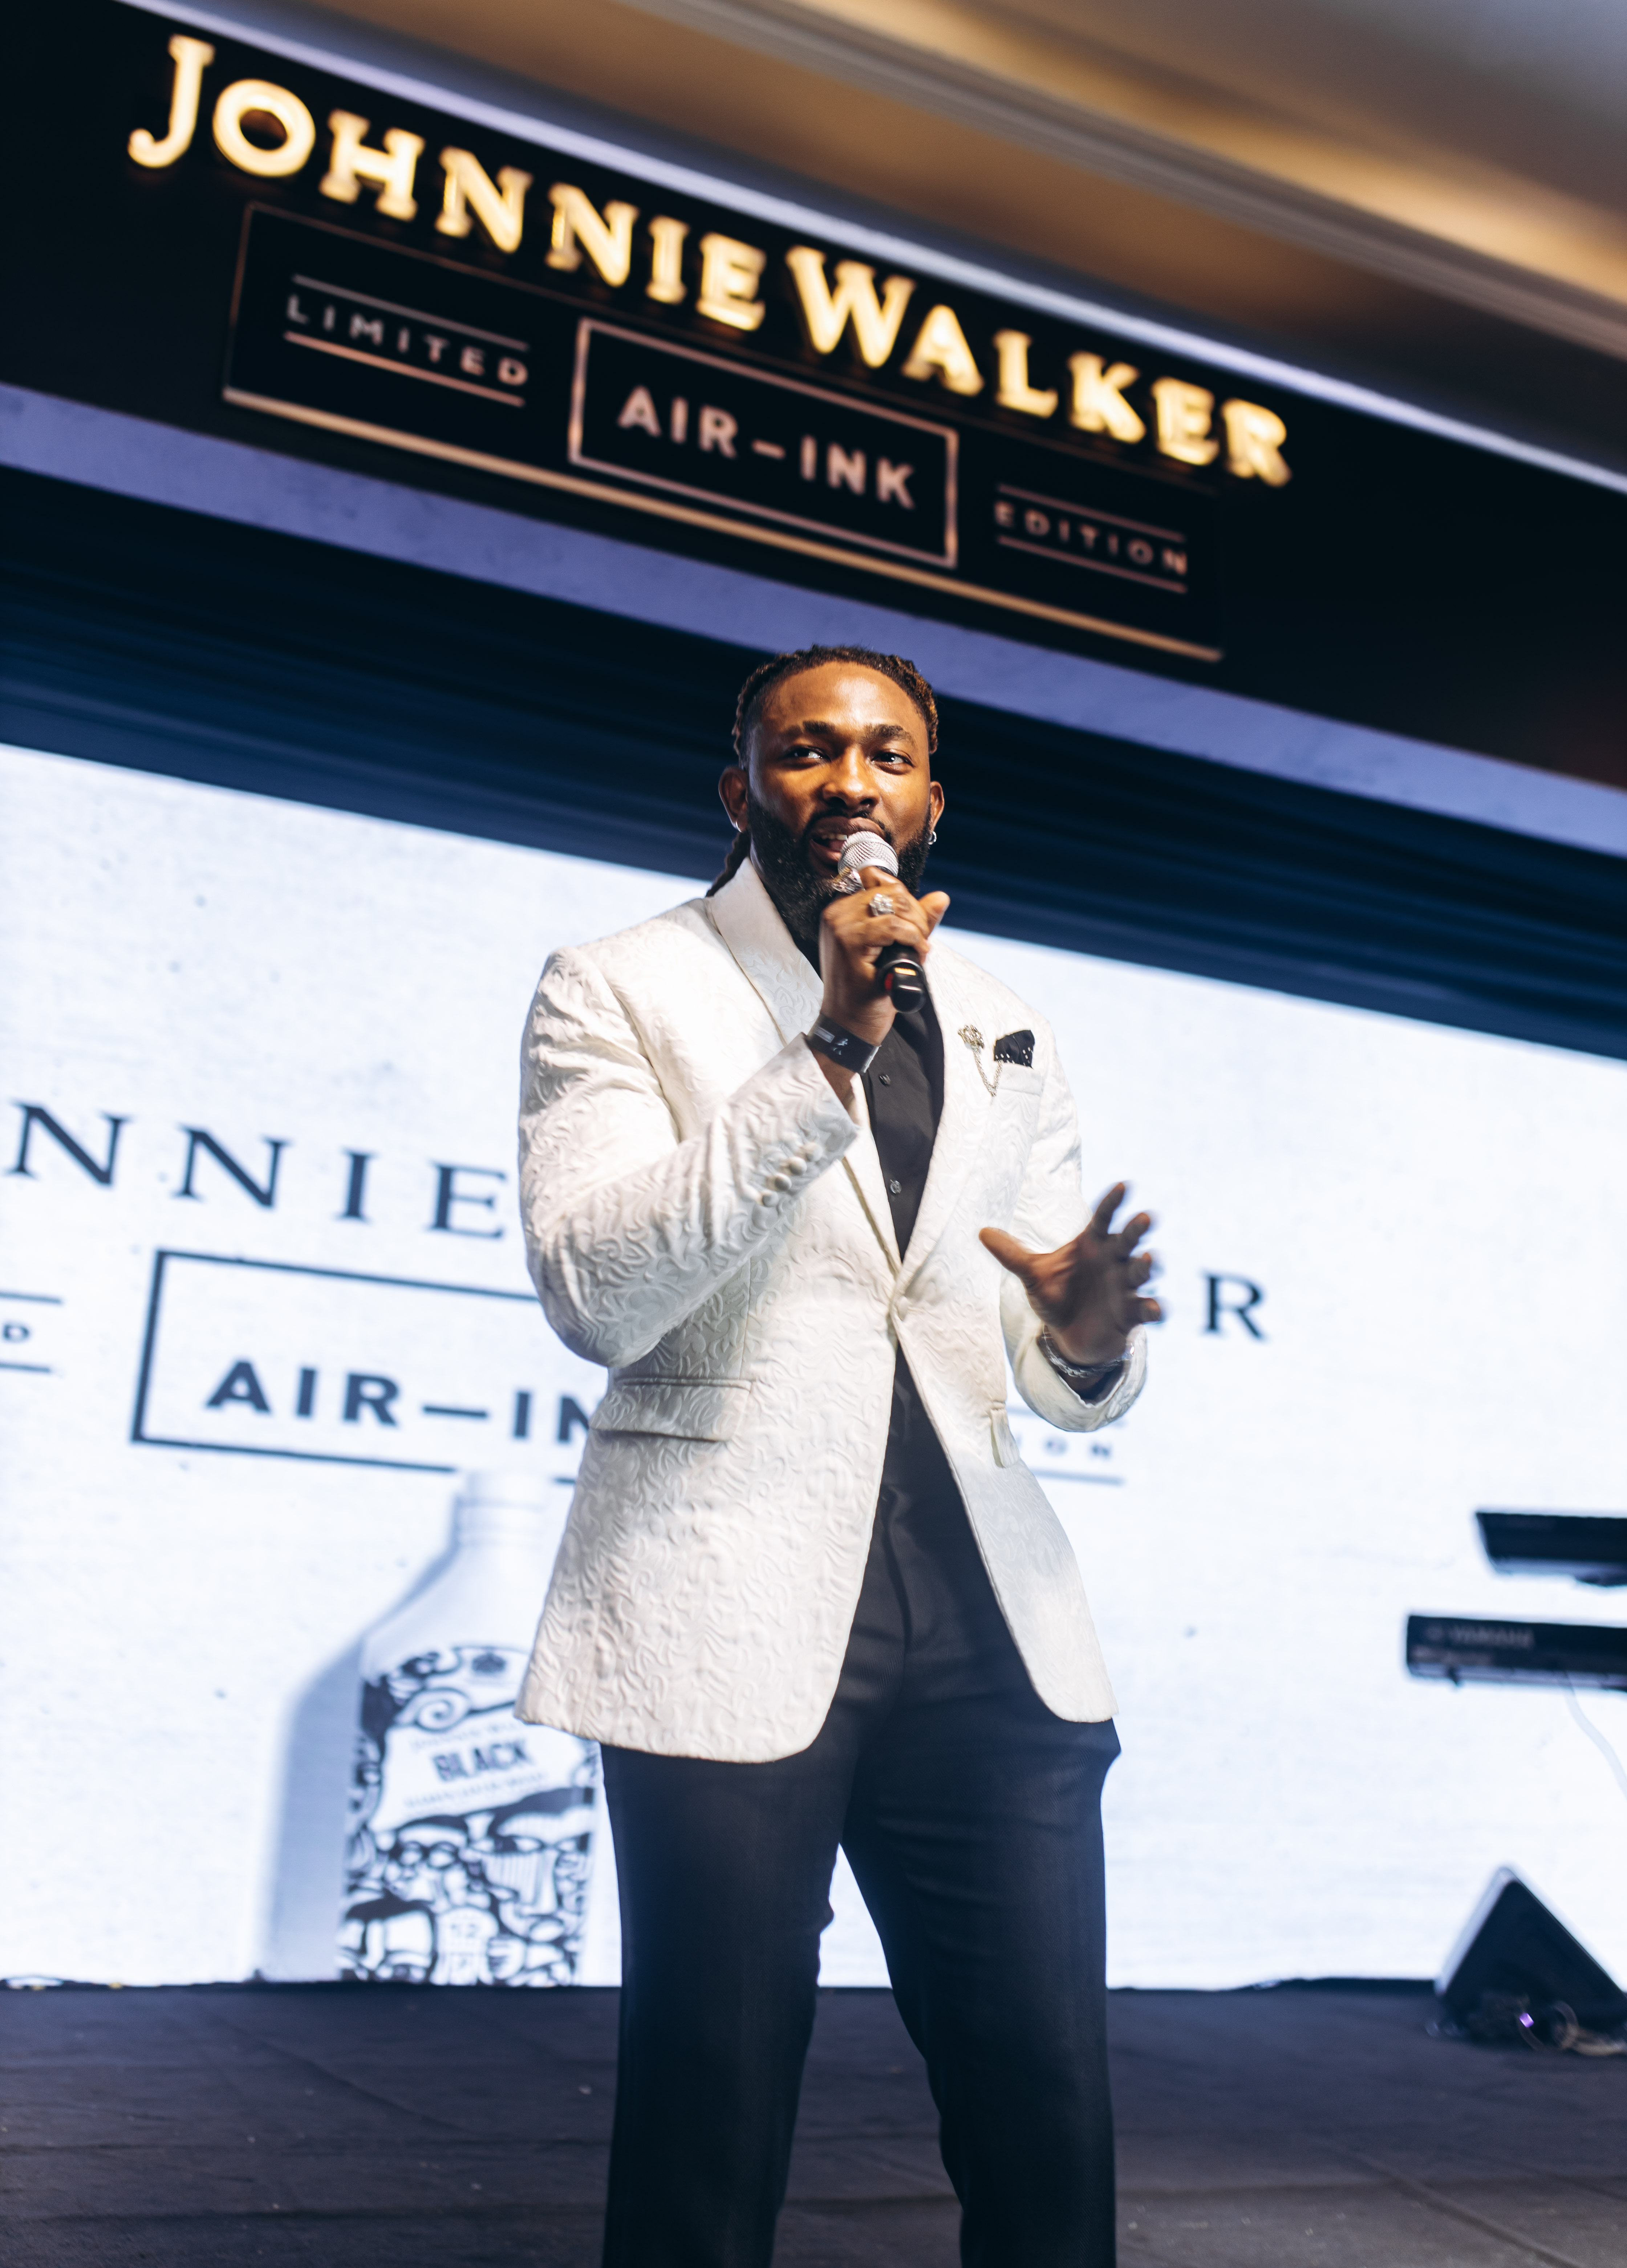 Johnny Walker, Air-Ink, Victor Ehikhamenor unveil limited- edition bottles inspired by Lagos for a sustainable future,